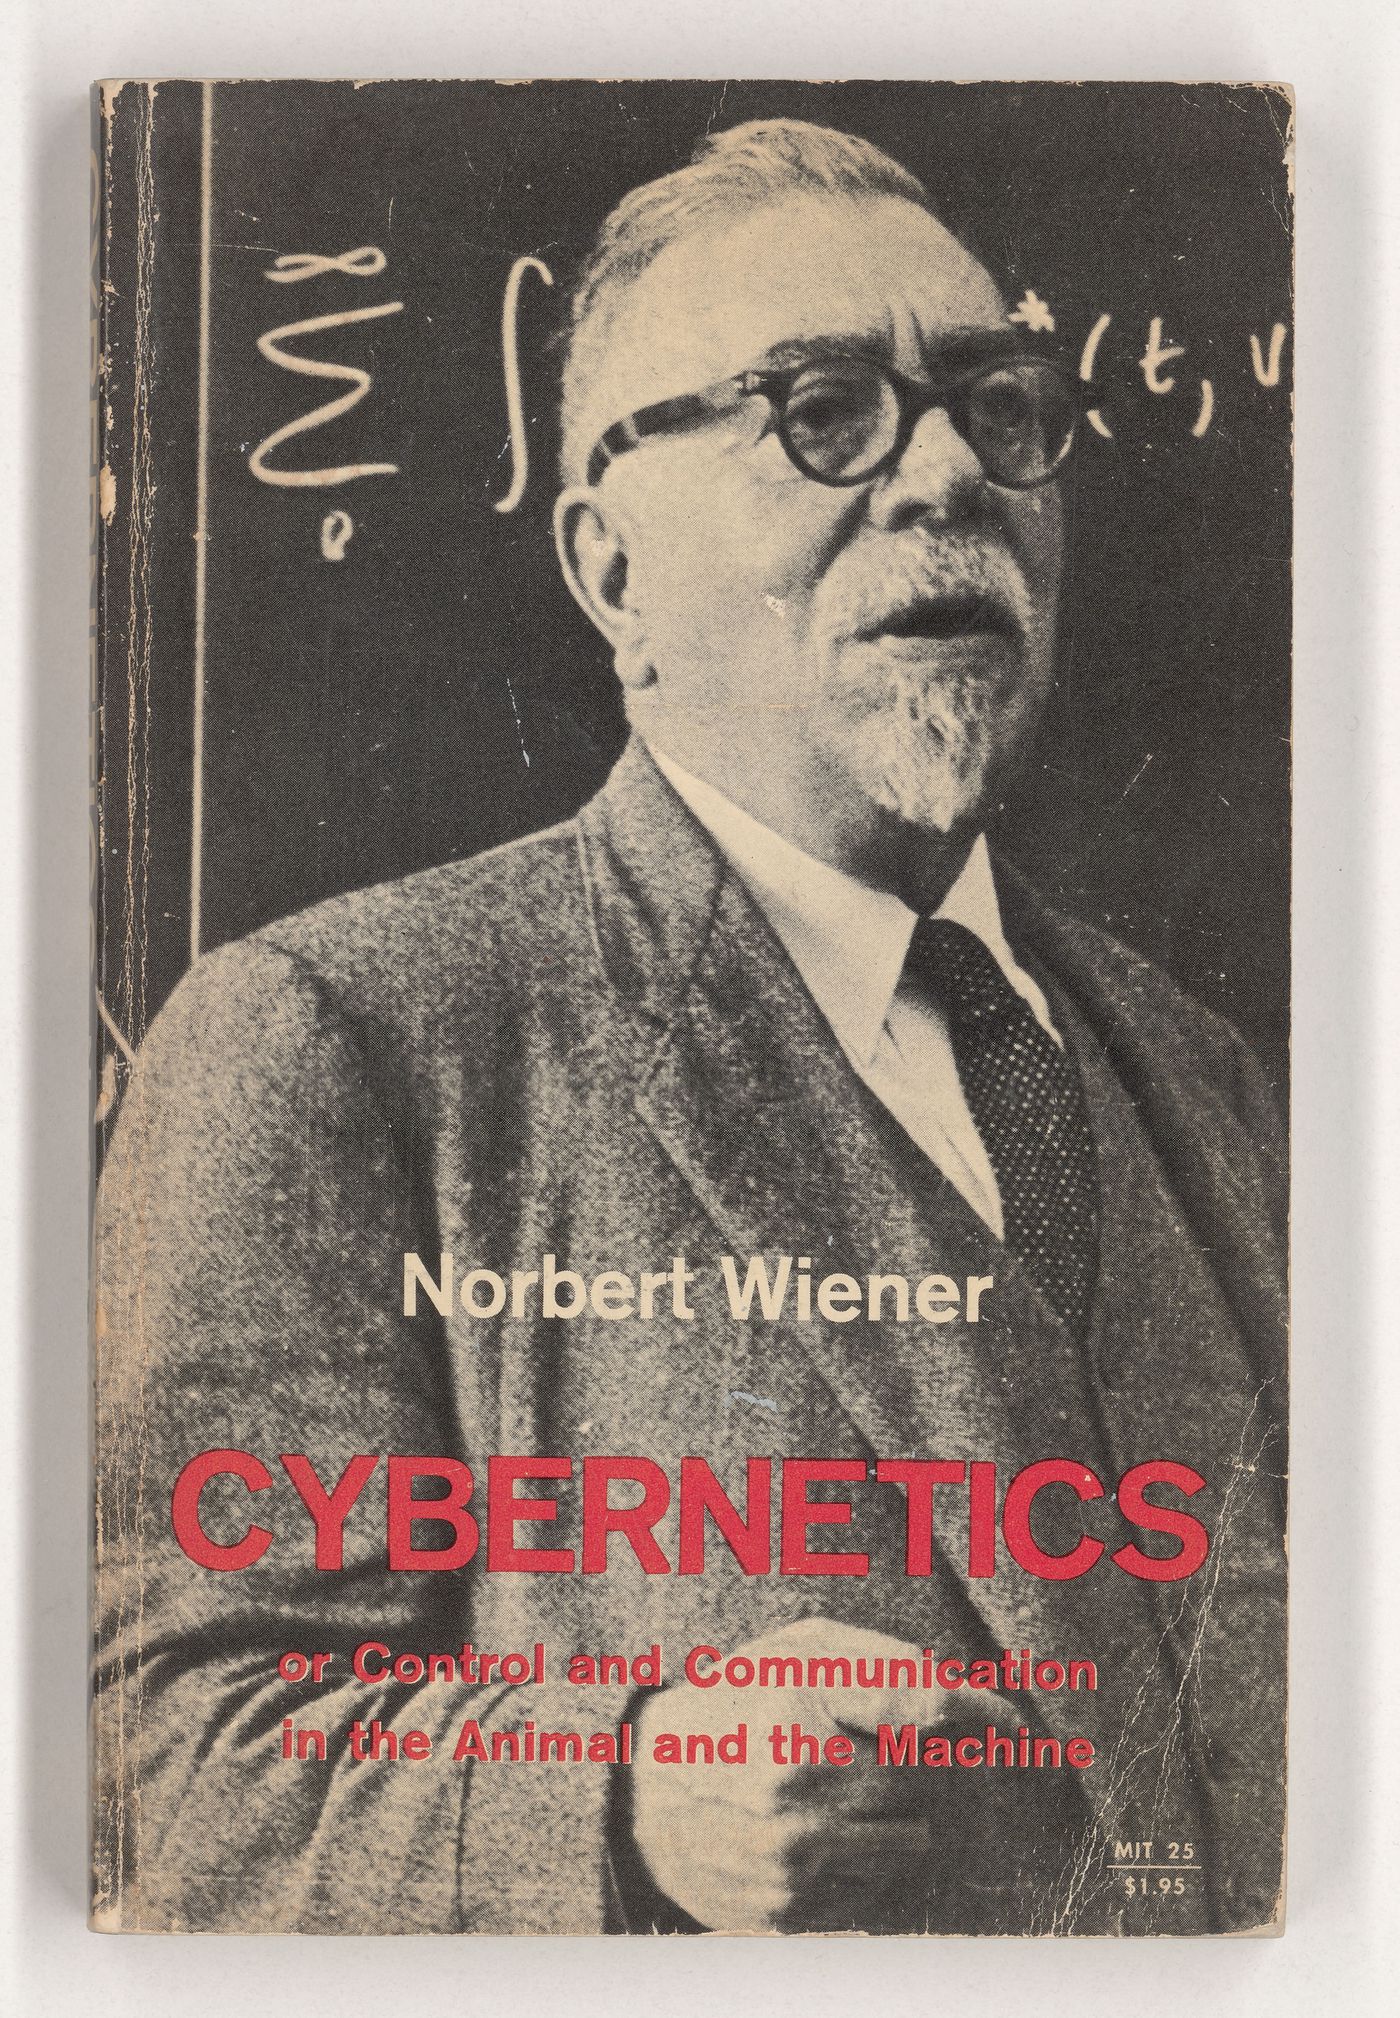 Cybernetics: or Control and Communication in the Animal and the Machine